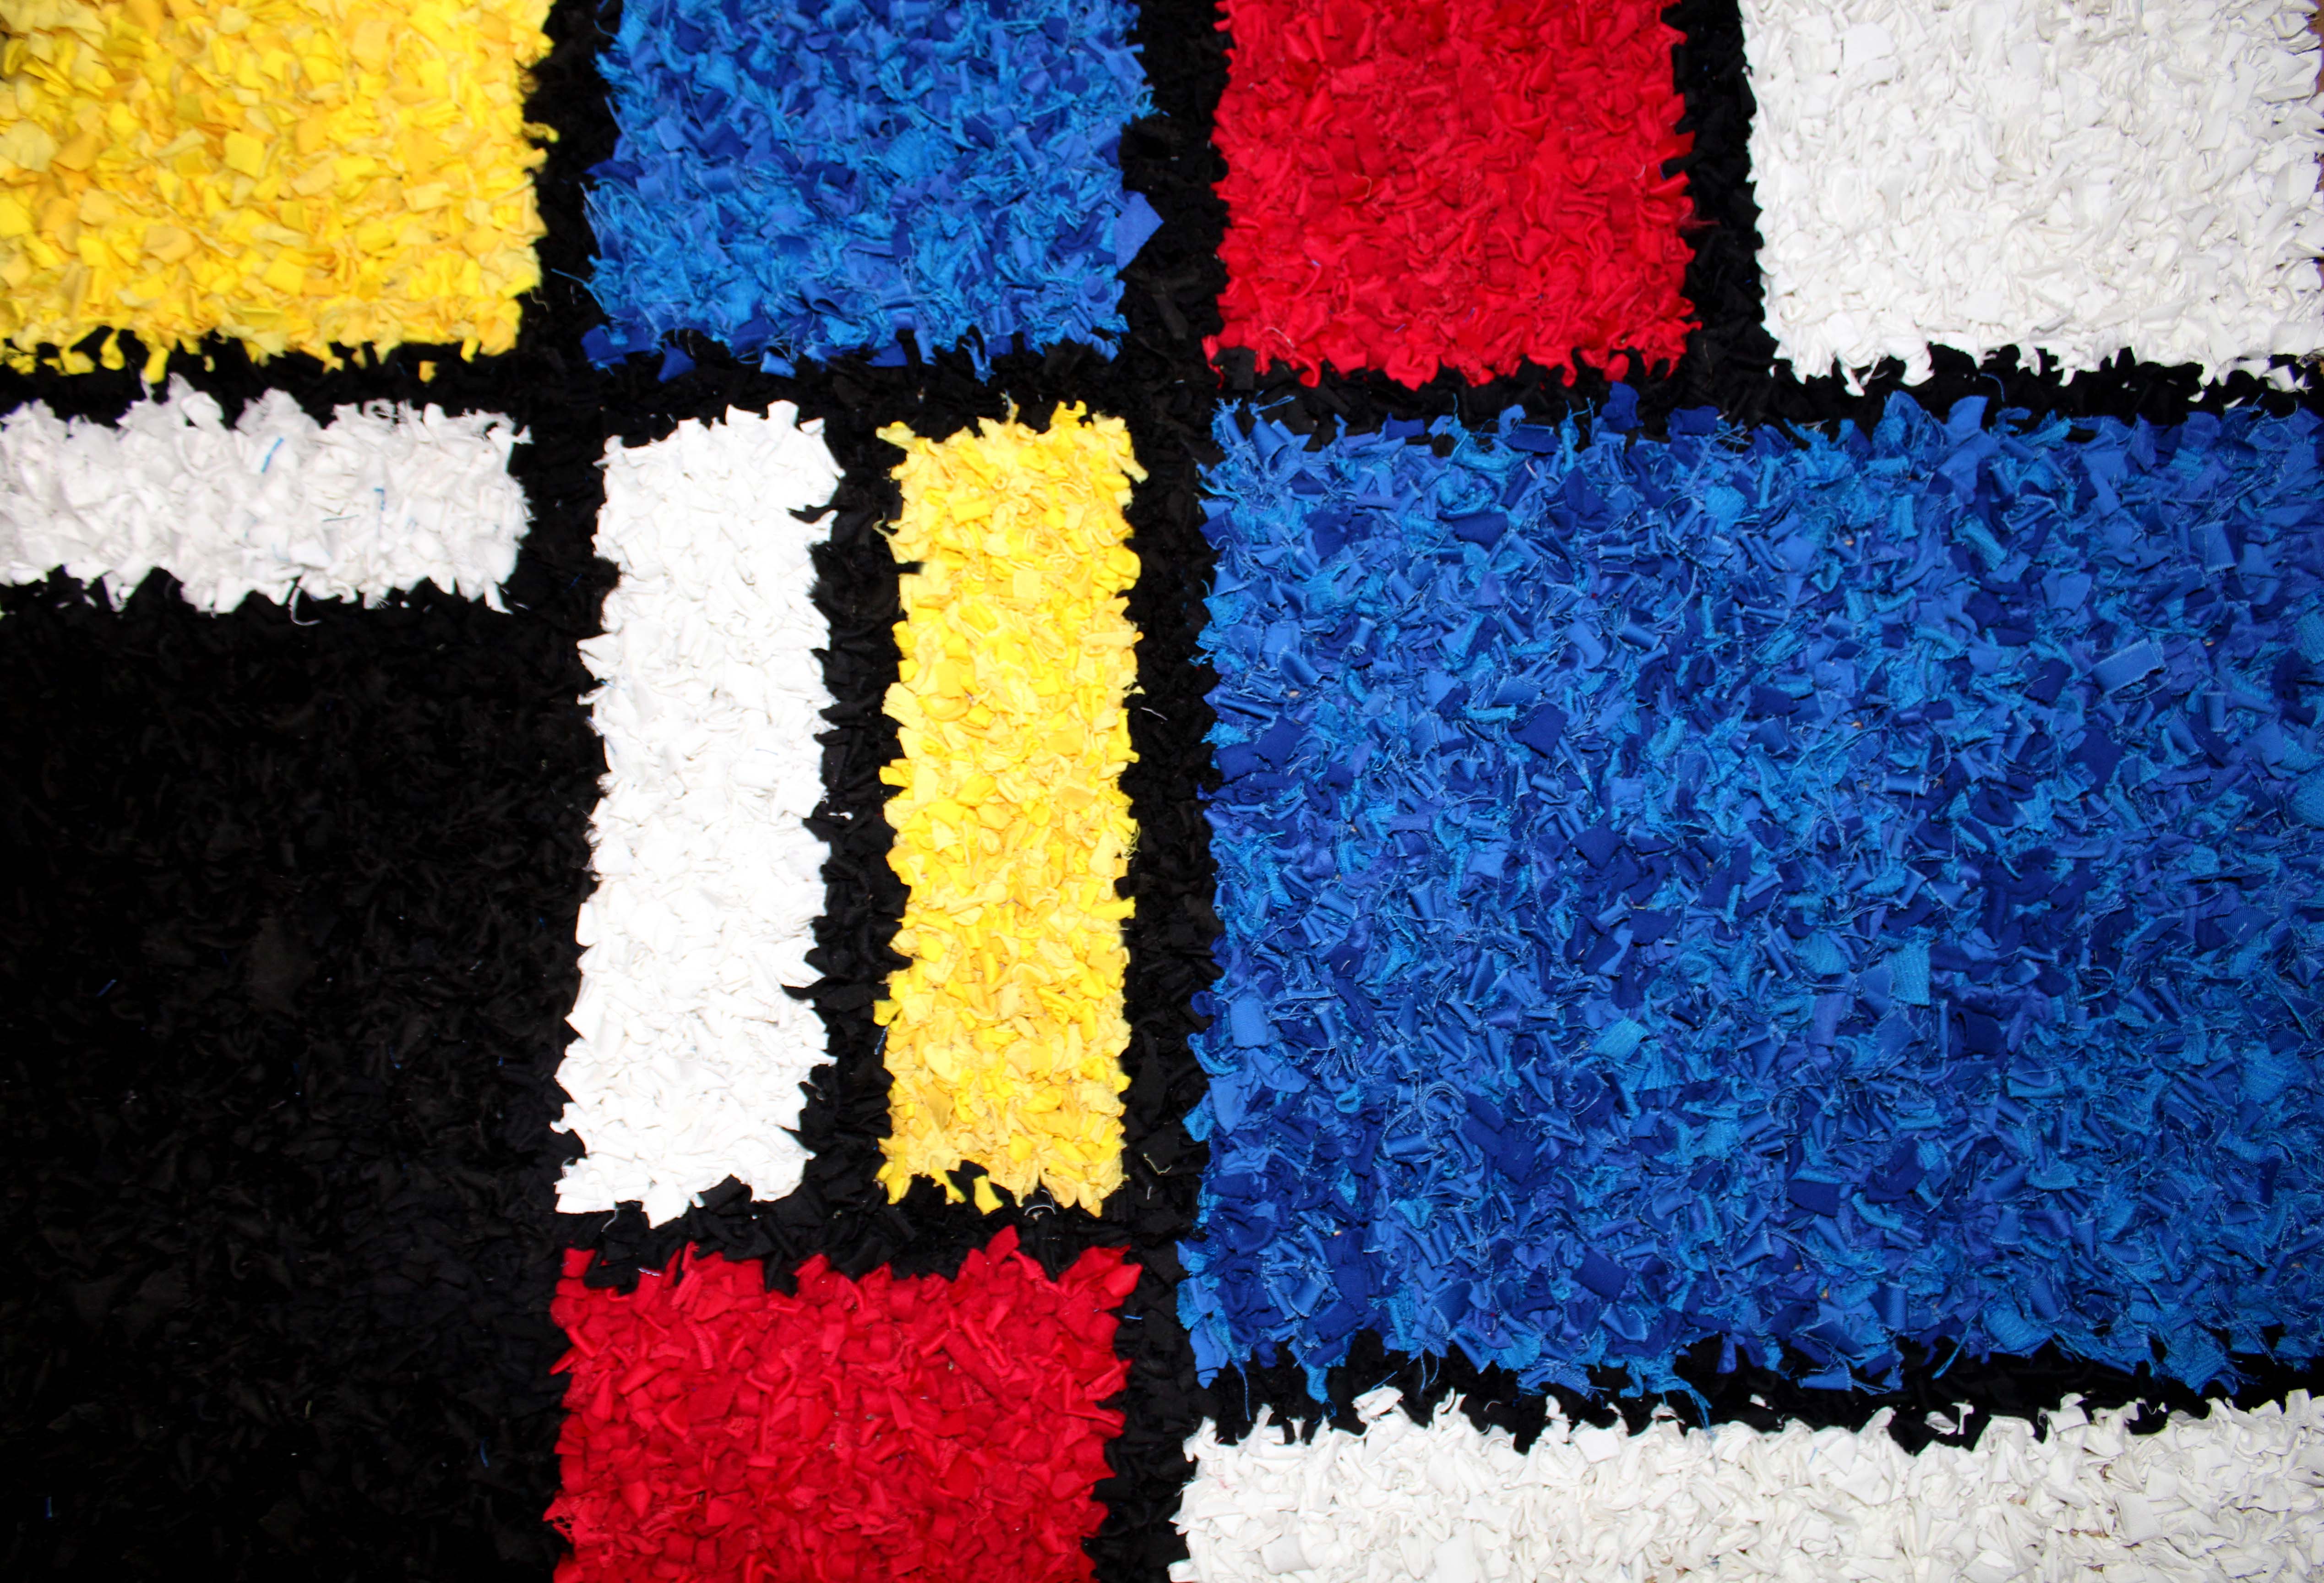 Top down photo of Mondrian inspired rag rug made using old clothing and offcuts from craft projects